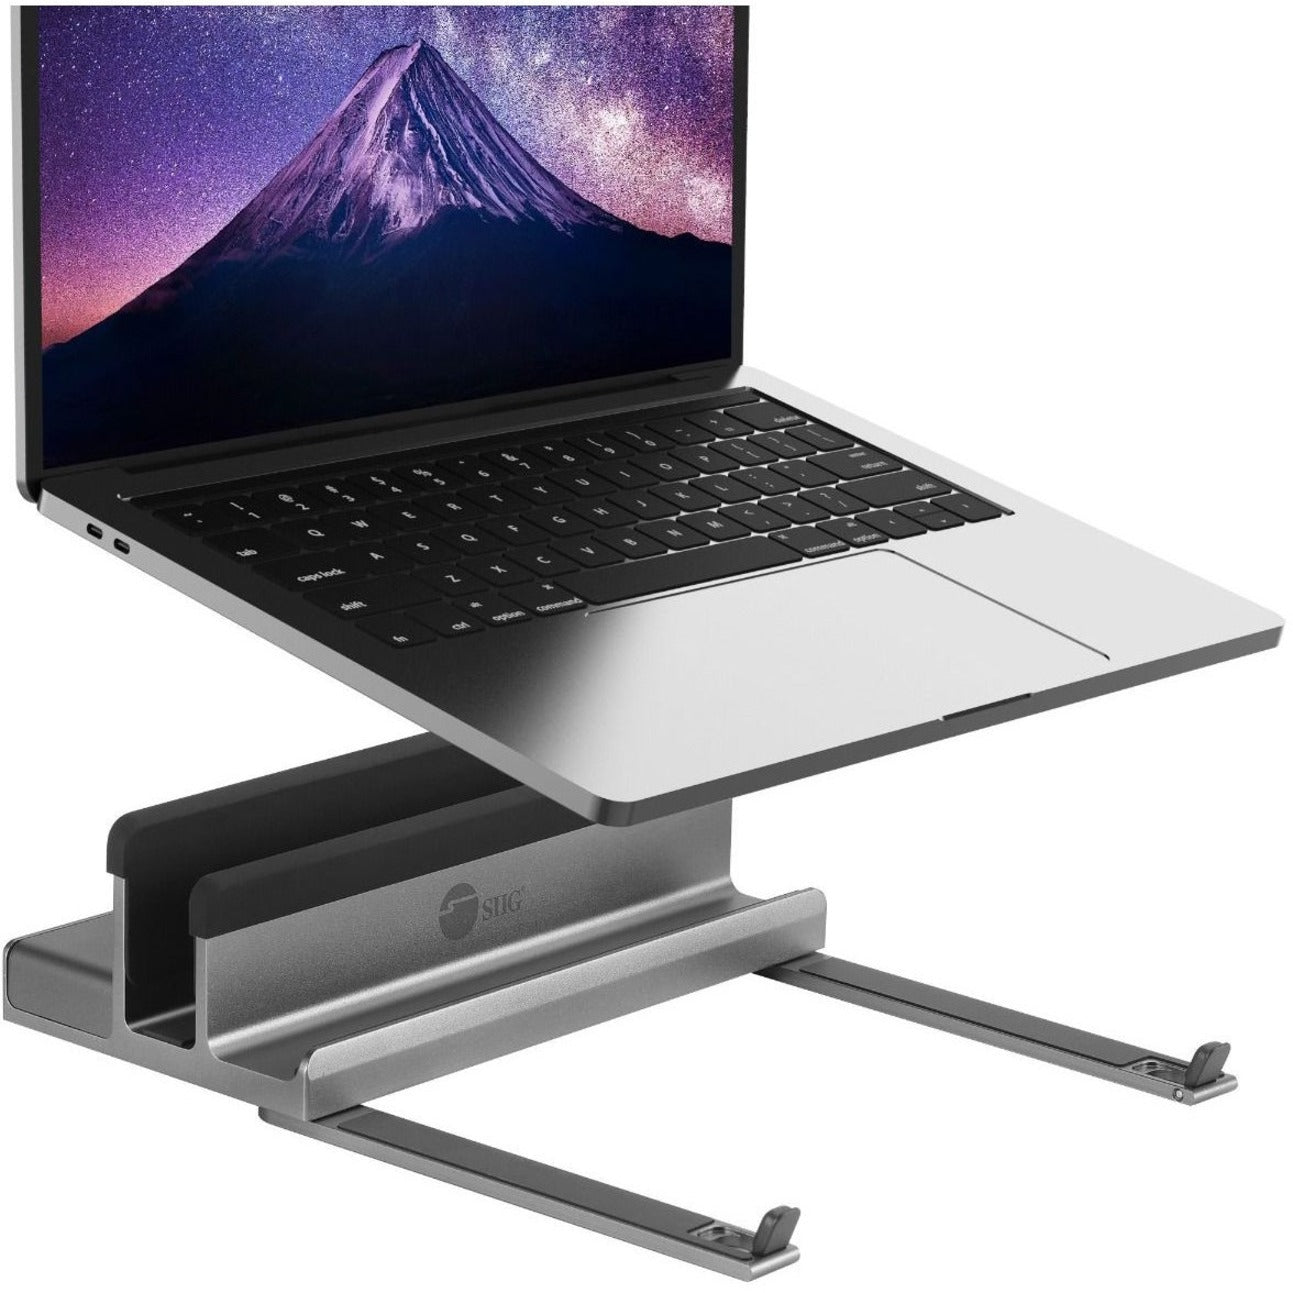 SIIG CE-MTDK21-S1 USB-C Laptop Stand W/ 4K Docking Station, 2 Year Warranty, Compatible with Windows, Mac, and More